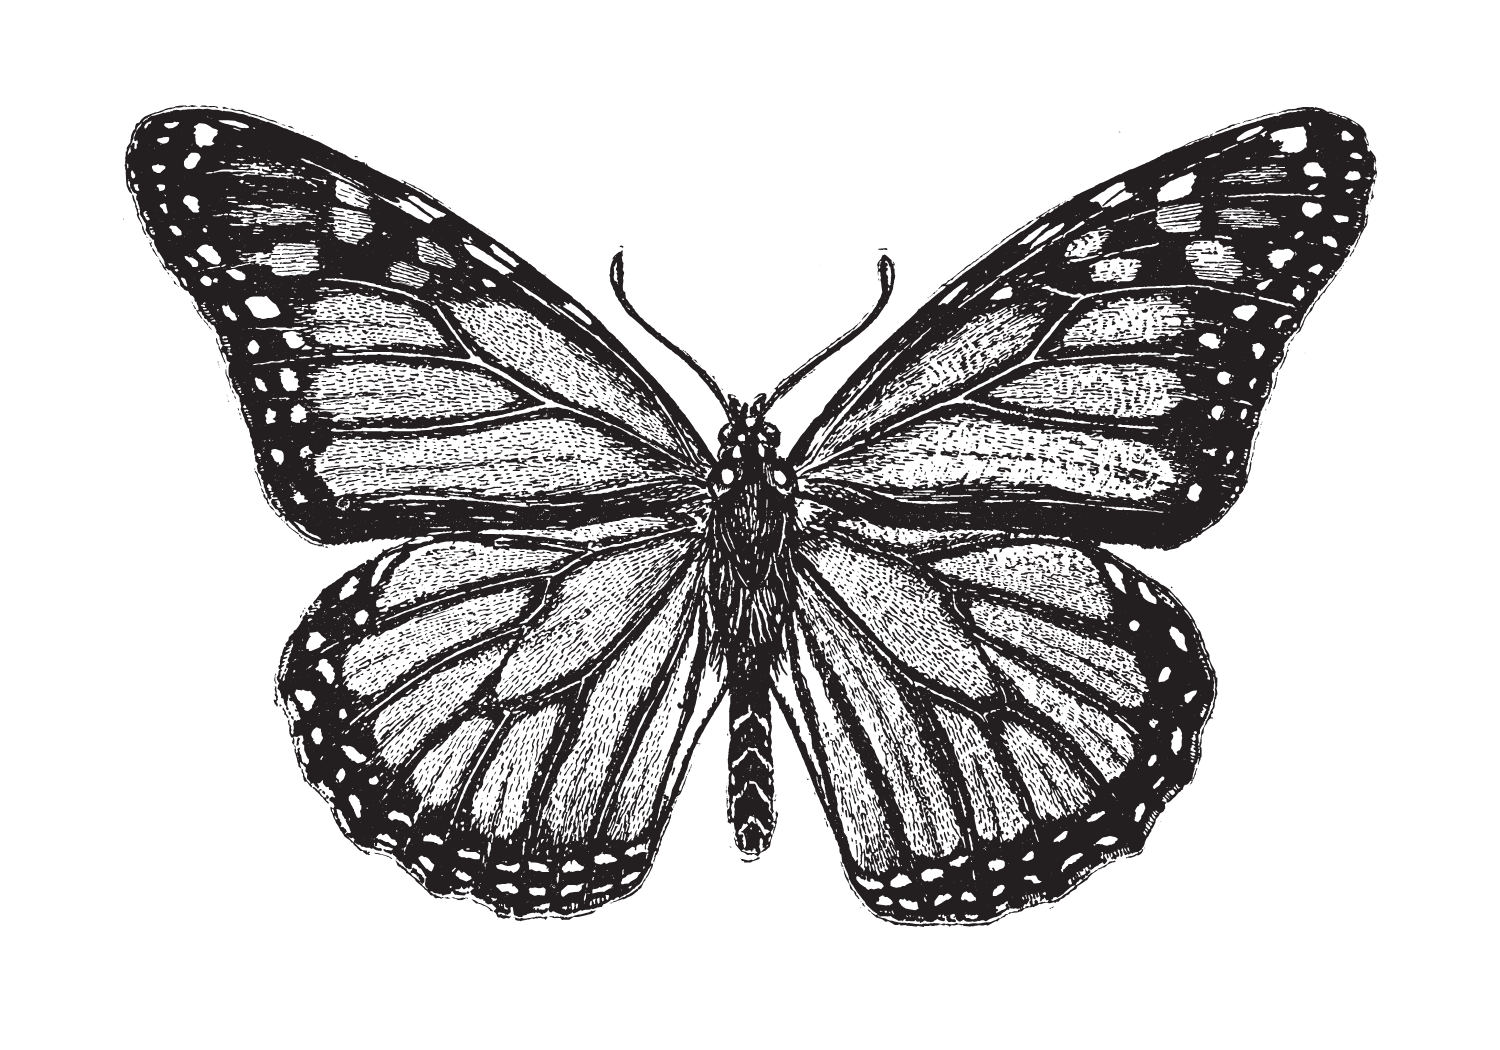 Full Butterfly Transformation in The Space: A Magical and Practical Membership for Manifesting Your Soul's Purpose and Passions in Black and White for Subjective Perspective